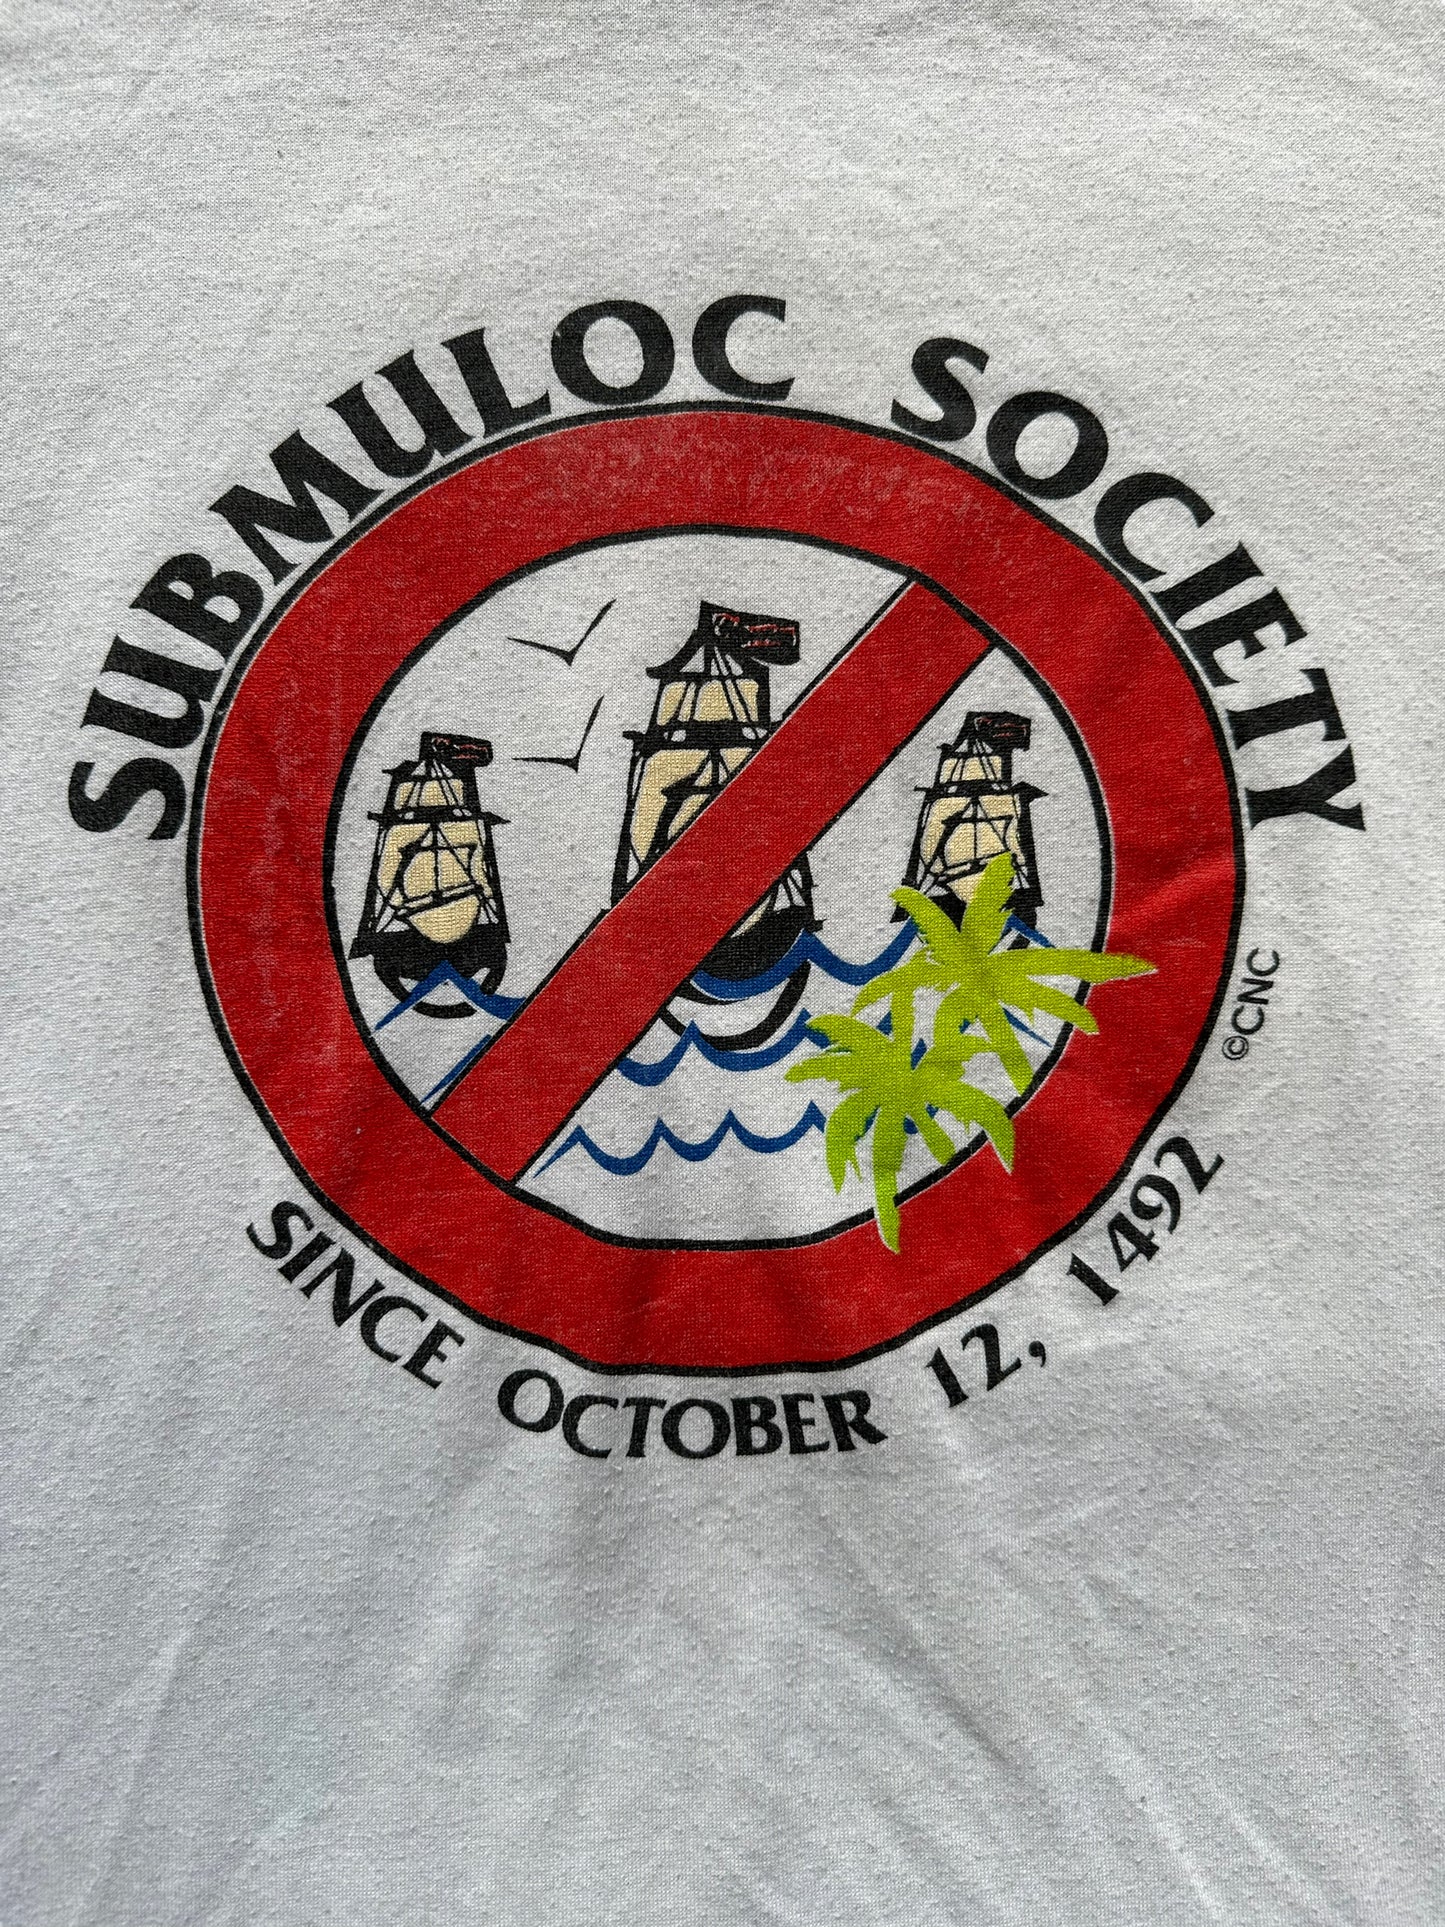 Graphic Detail on Vintage Submuloc First Nations Anti-Columbus Tee SZ M | Vintage Graphic T-Shirts Seattle | Barn Owl Vintage Tees Seattle